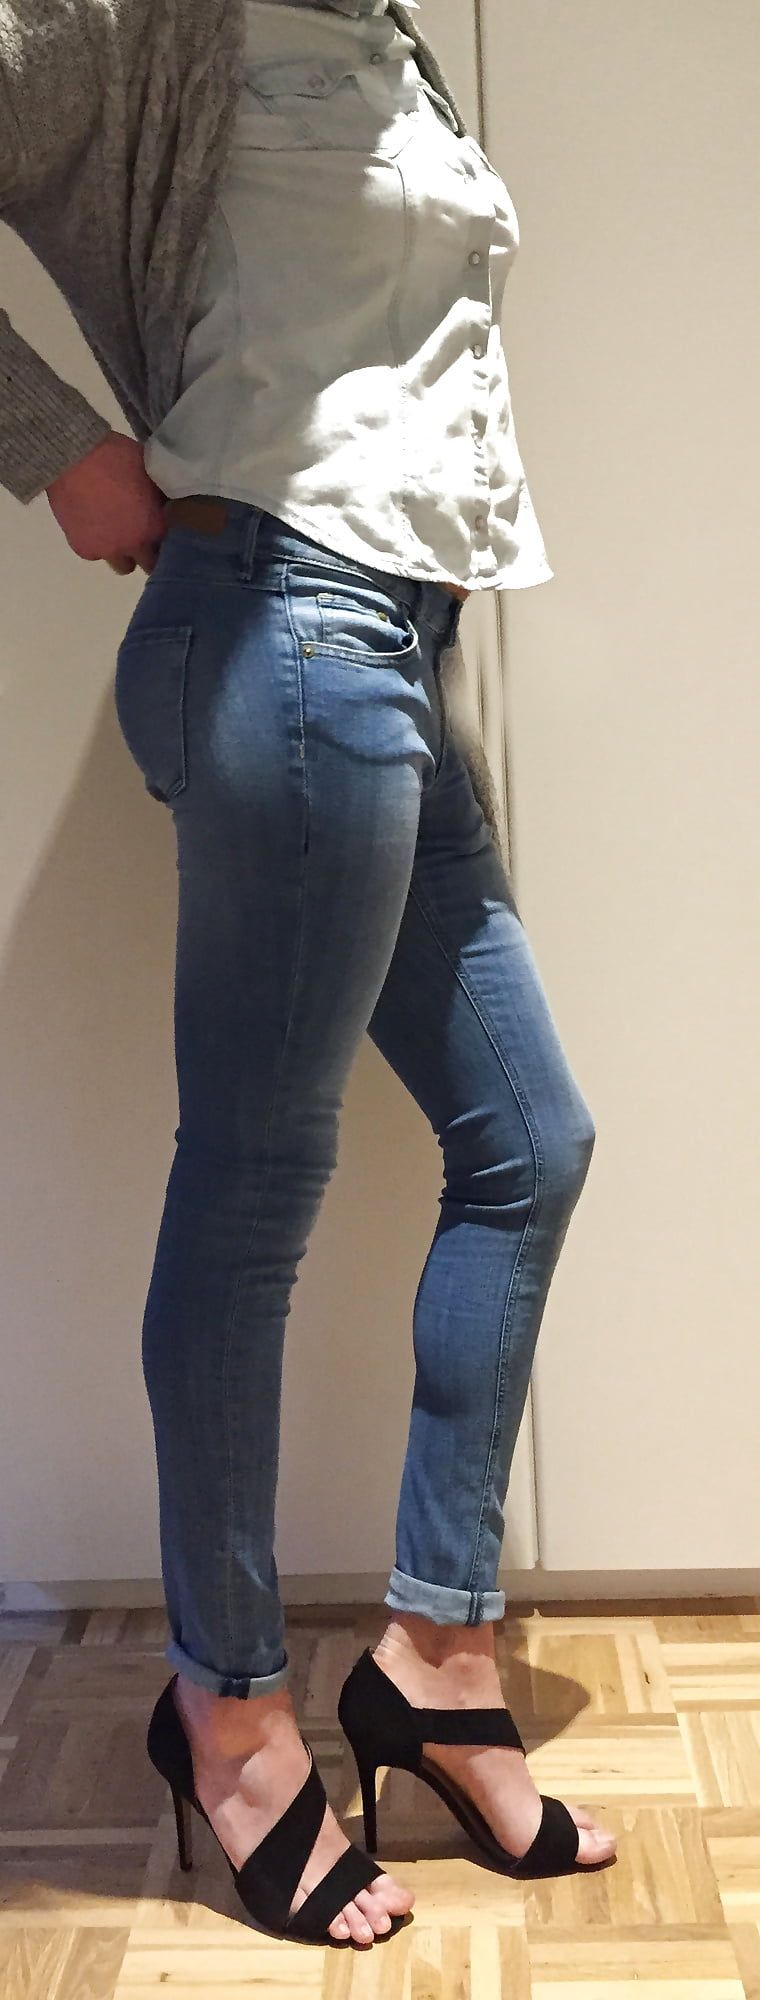 Jeans on jeans #6